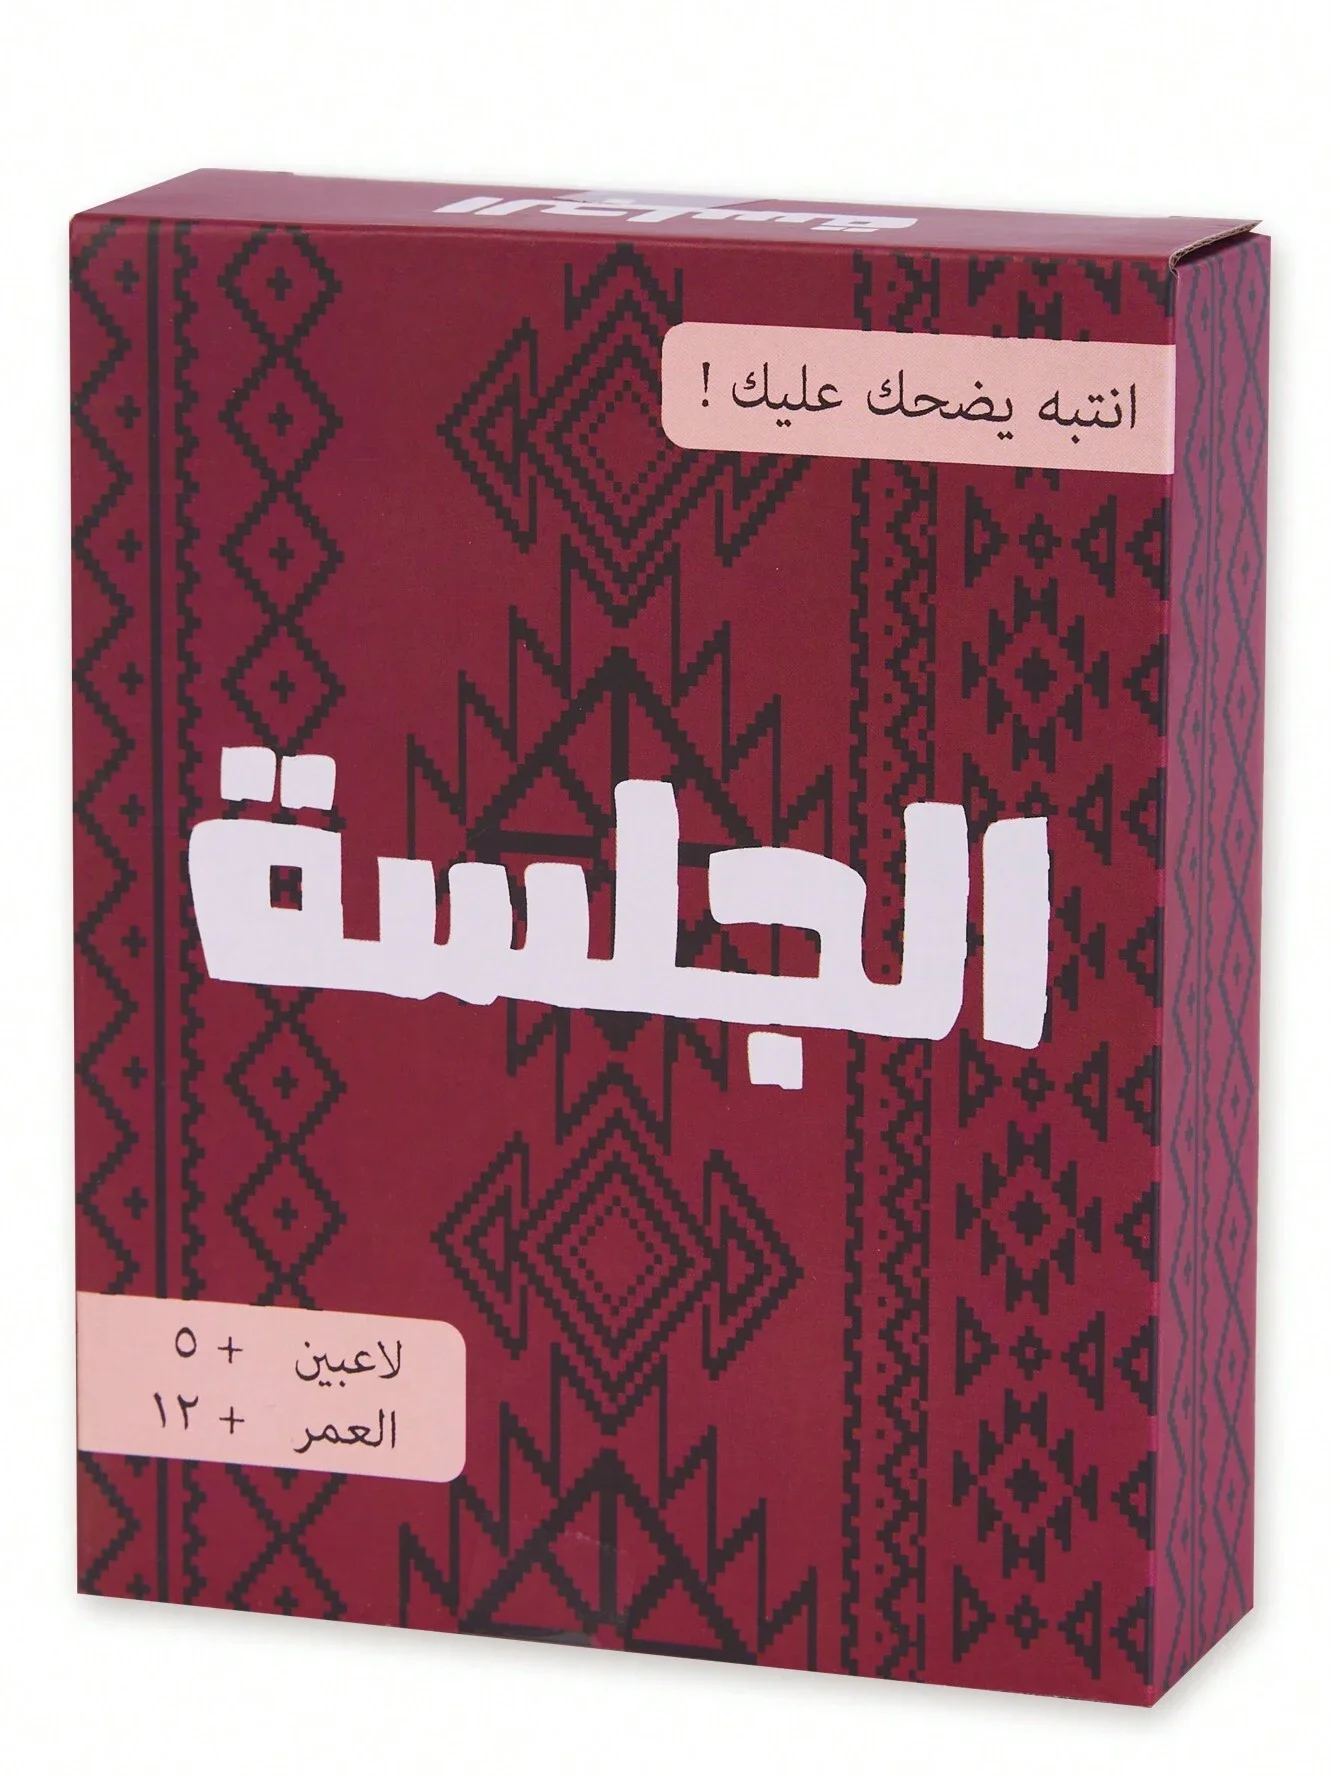 

Session Interactive board games and fun Arabic card games for holiday gifts, family gatherings, and friends!